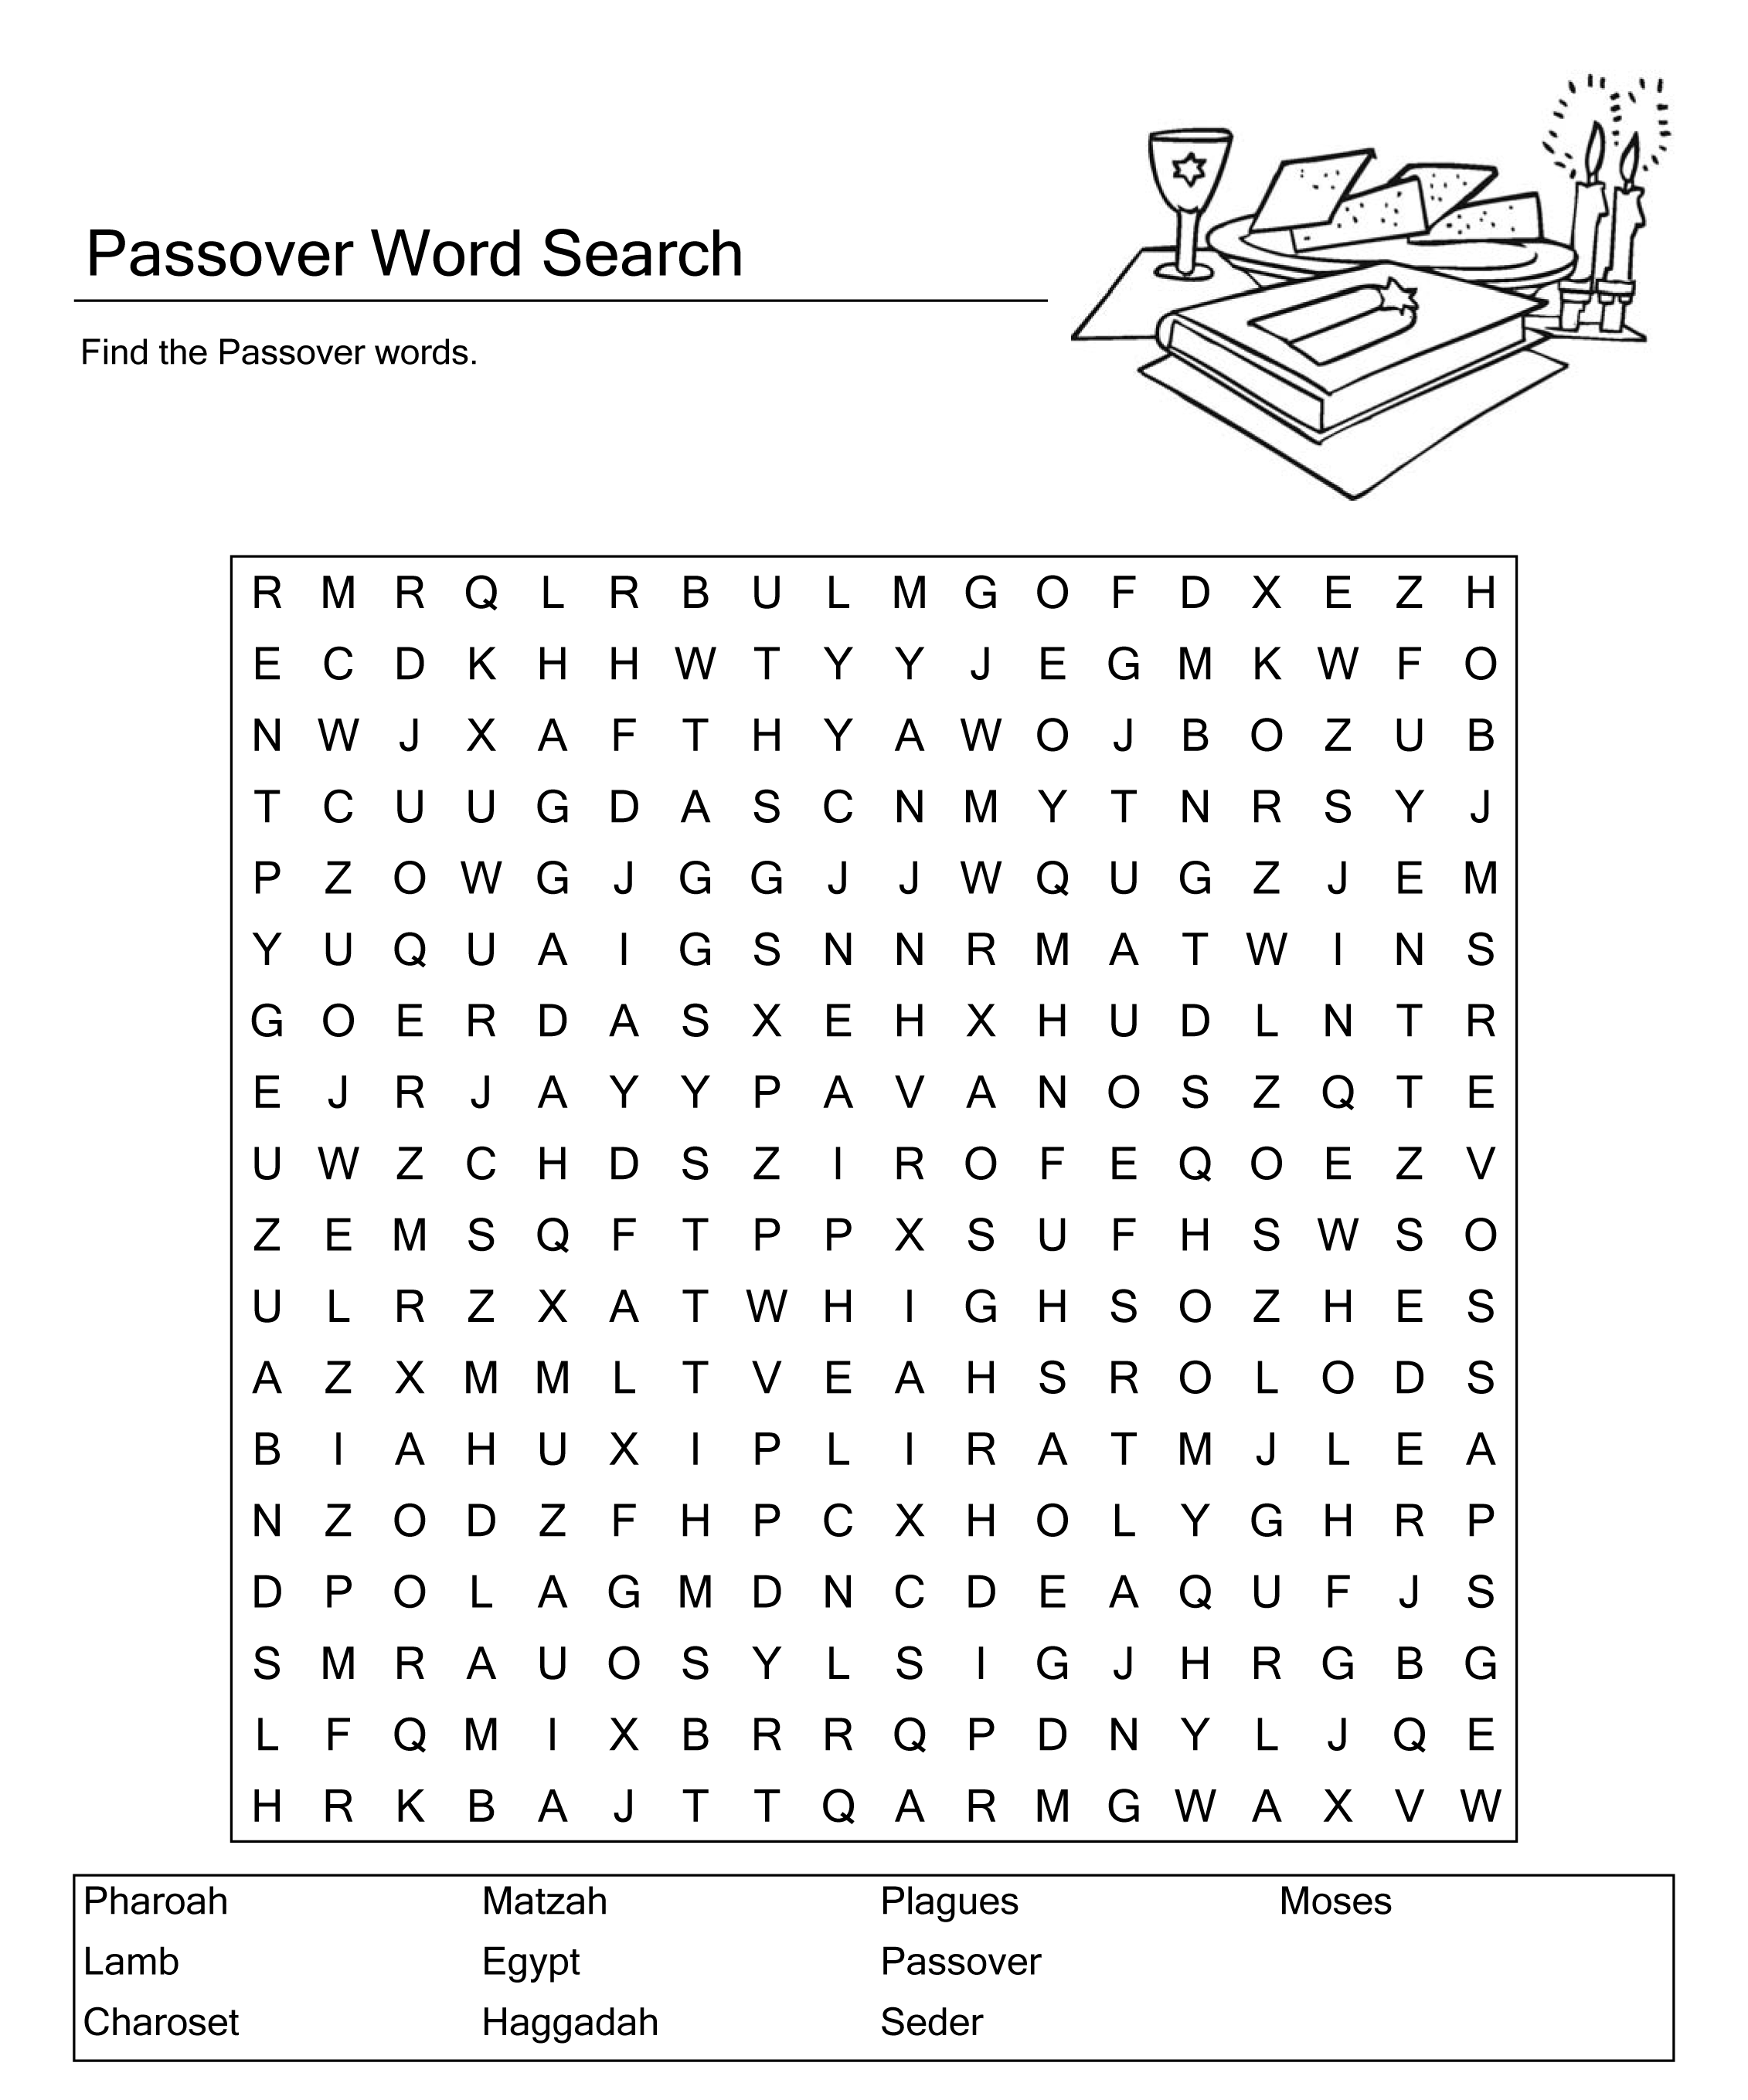 Passover Wordsearch Passover haggadah by Melanie Fine